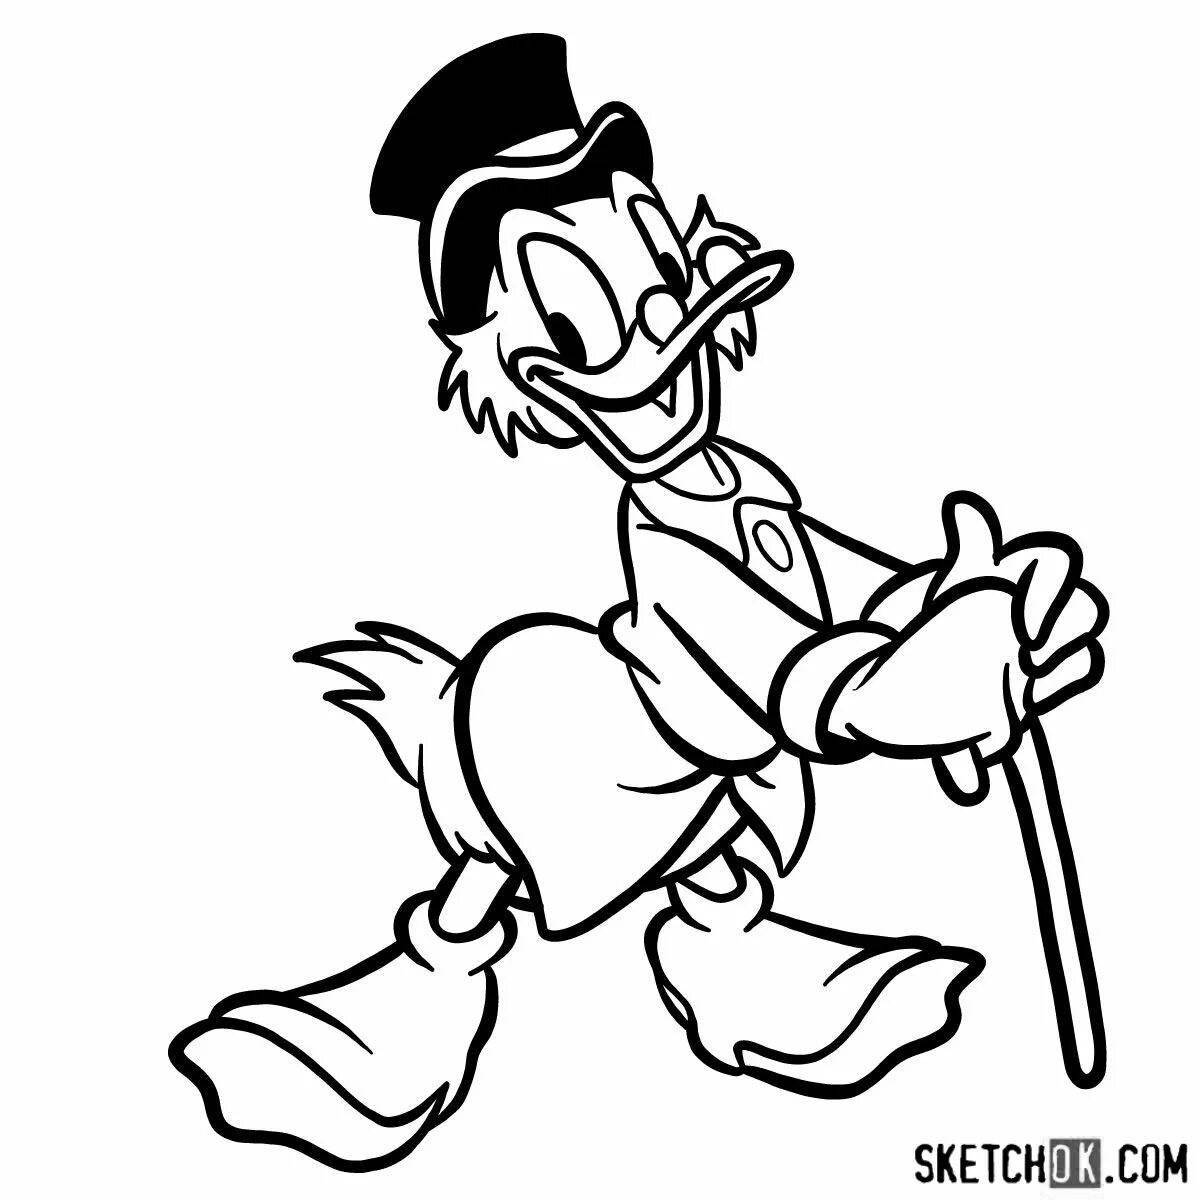 Exquisite scrooge mcduck with money coloring book